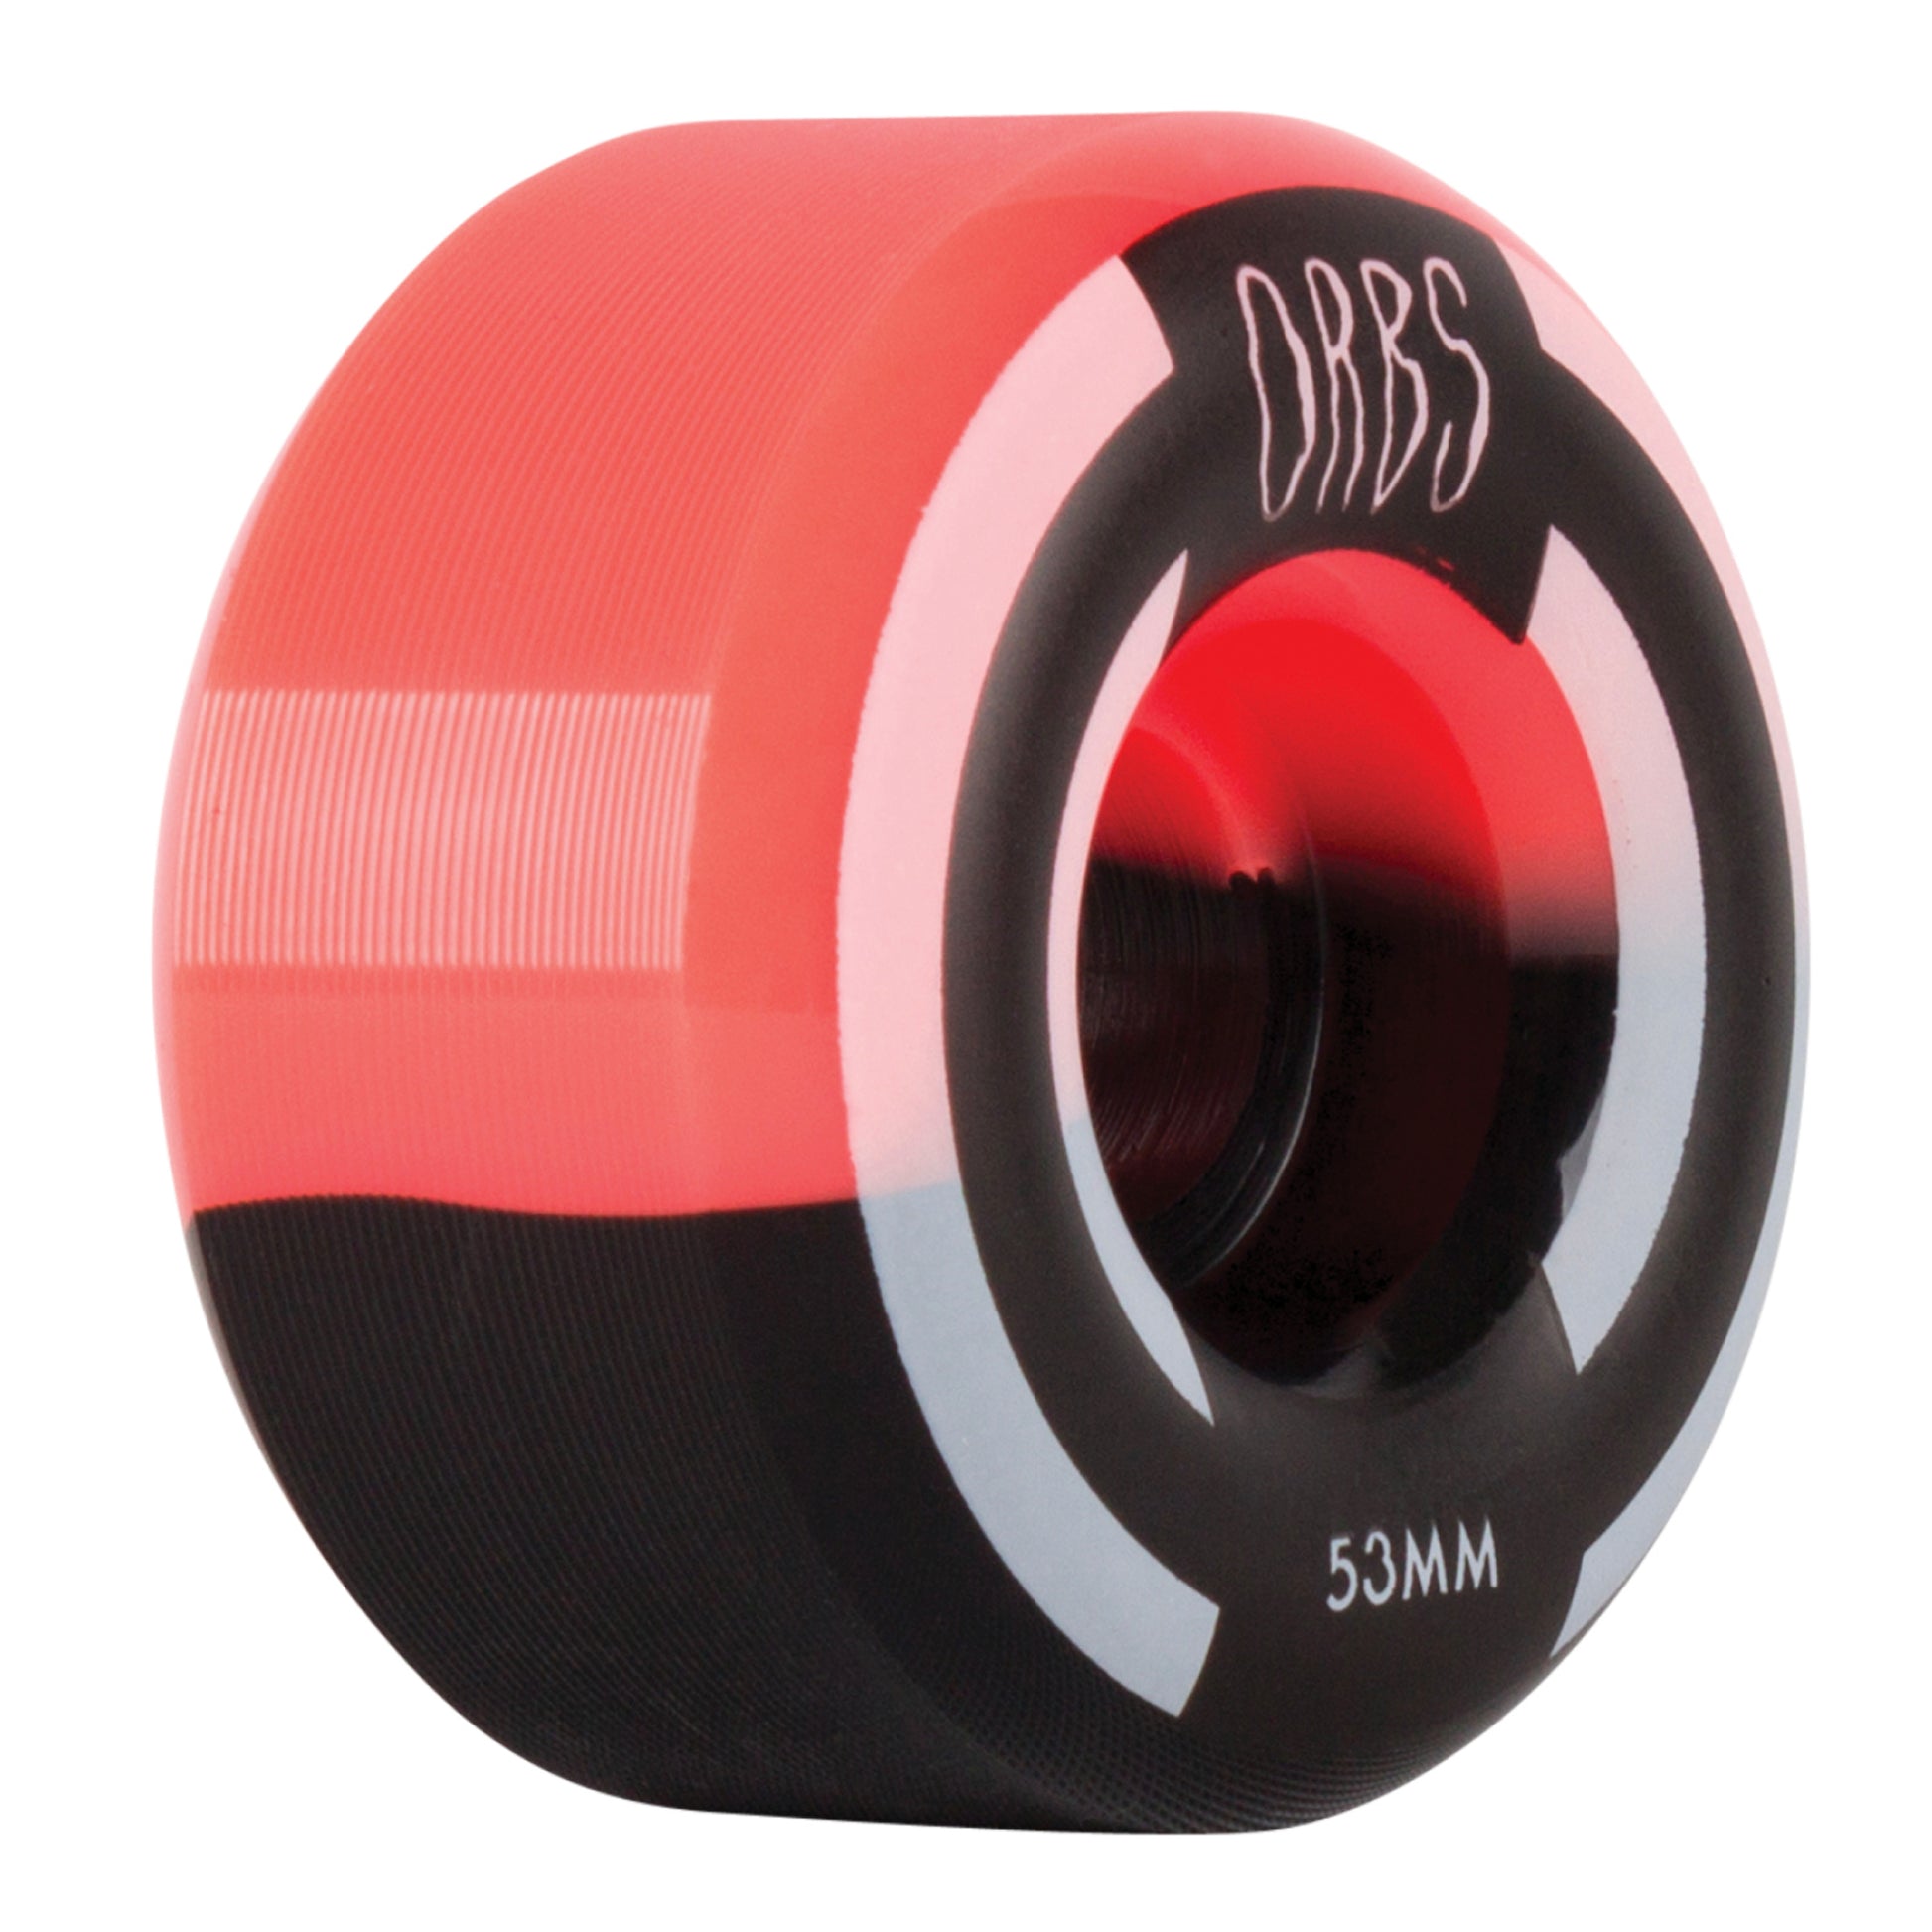 Orbs - 53mm - 99a - Apparitions Splits - Coral/Black - Prime Delux Store